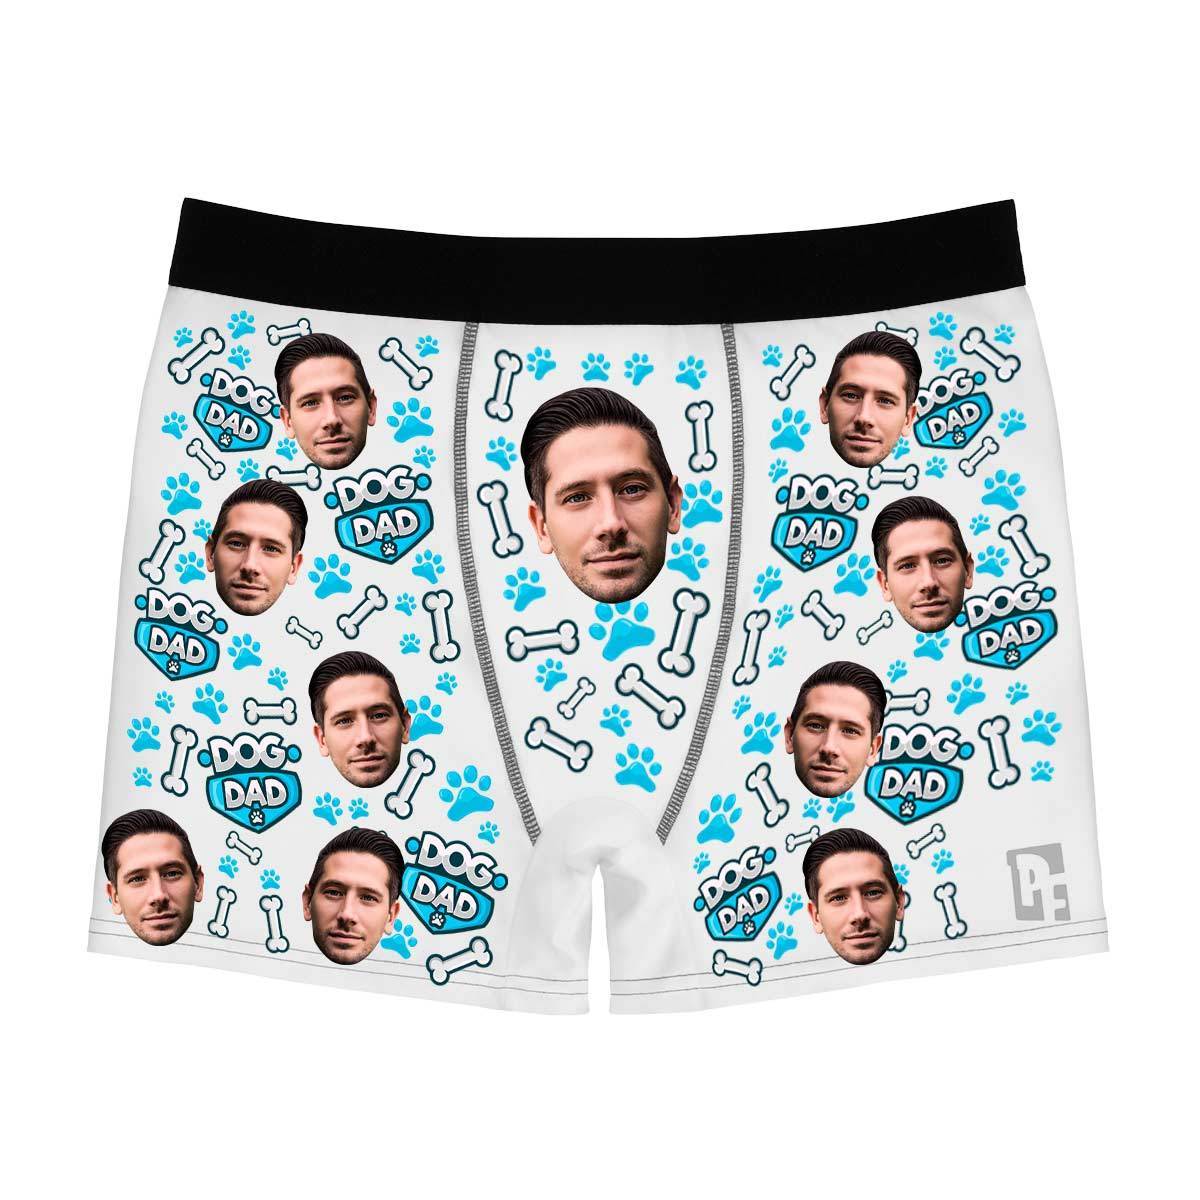 White Dog dad men's boxer briefs personalized with photo printed on them